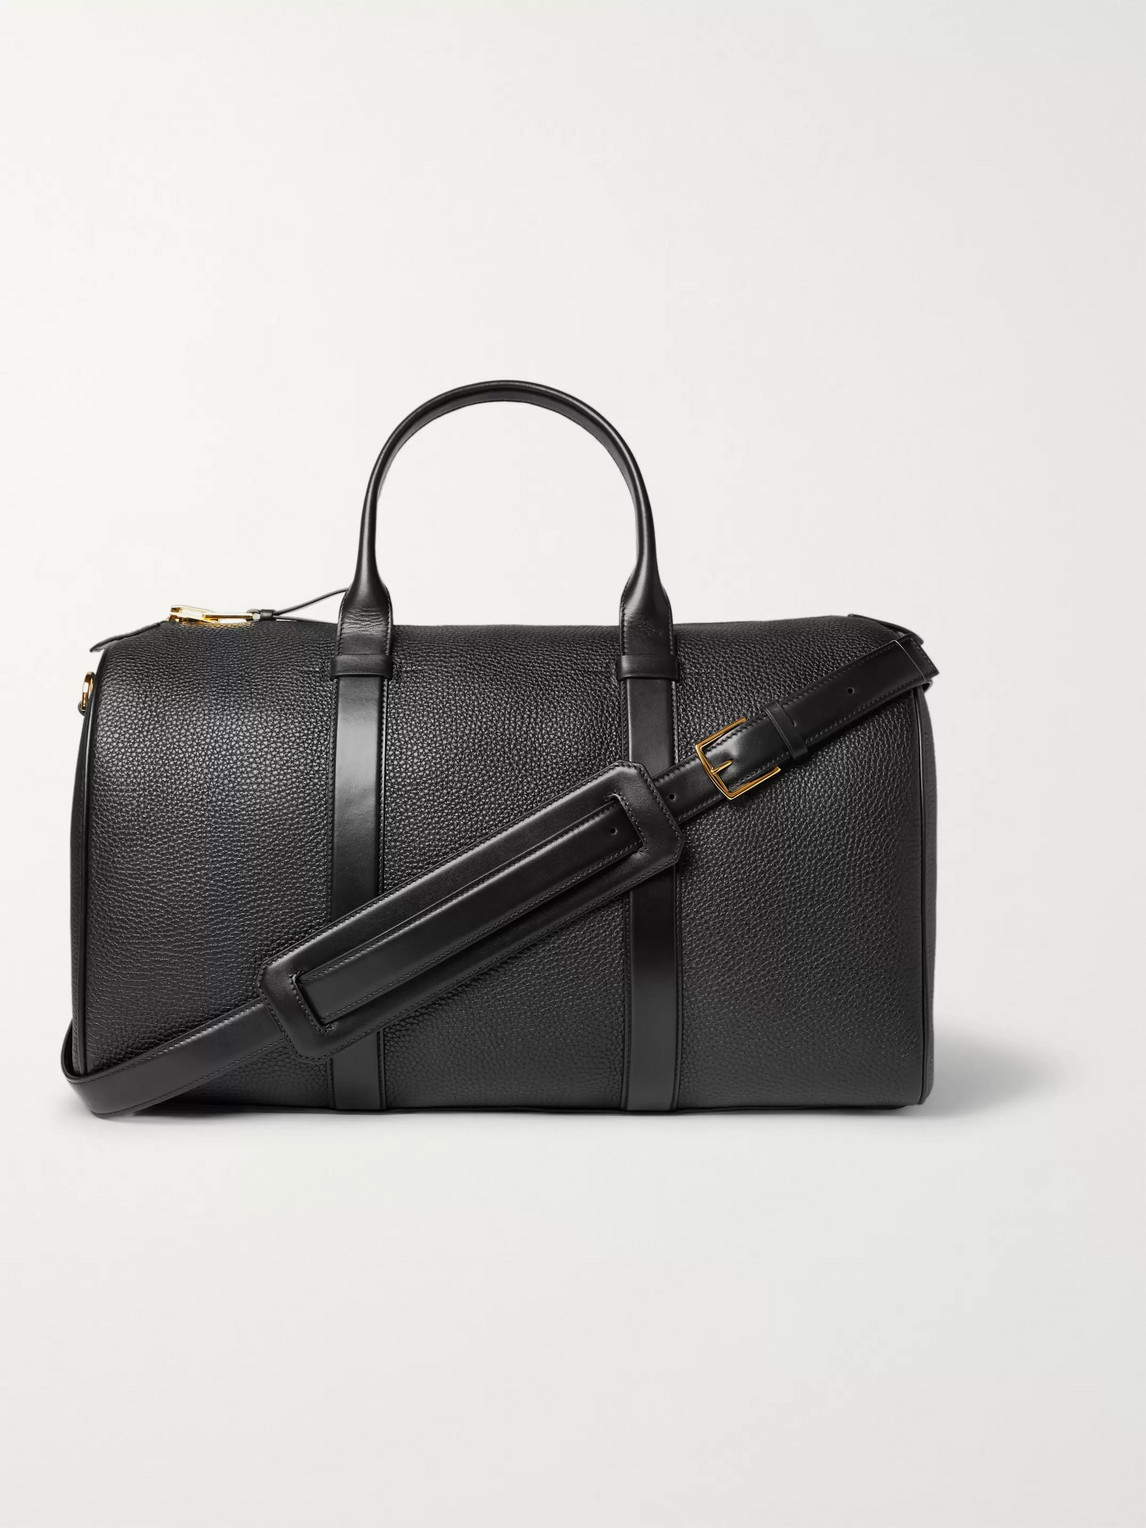 TOM FORD BUCKLEY PEBBLE-GRAIN LEATHER HOLDALL